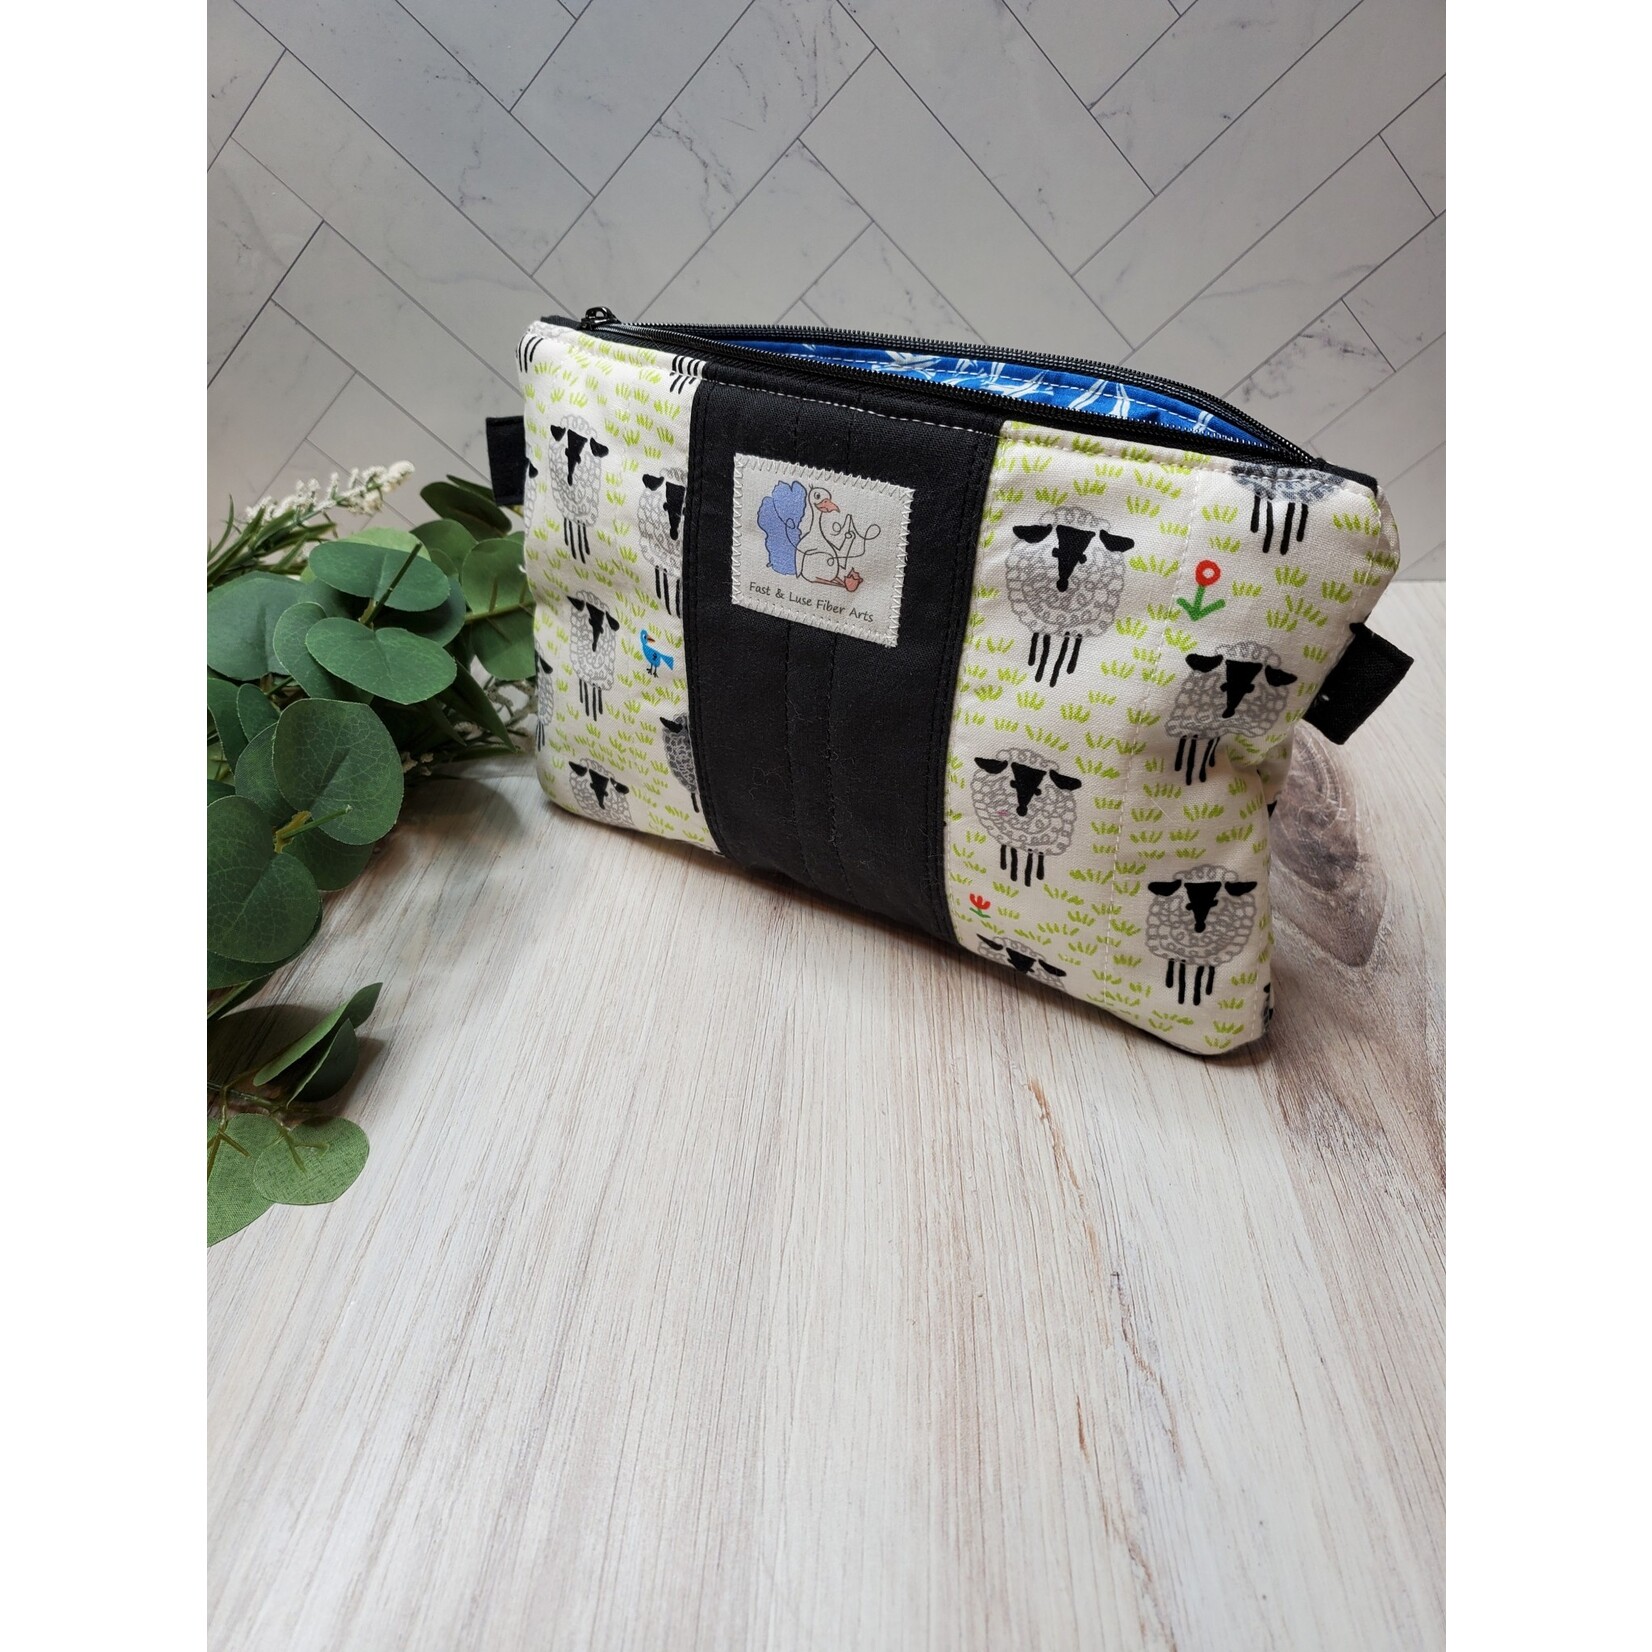 Fast and Luse Zipper Pouch - Sheep - Medium